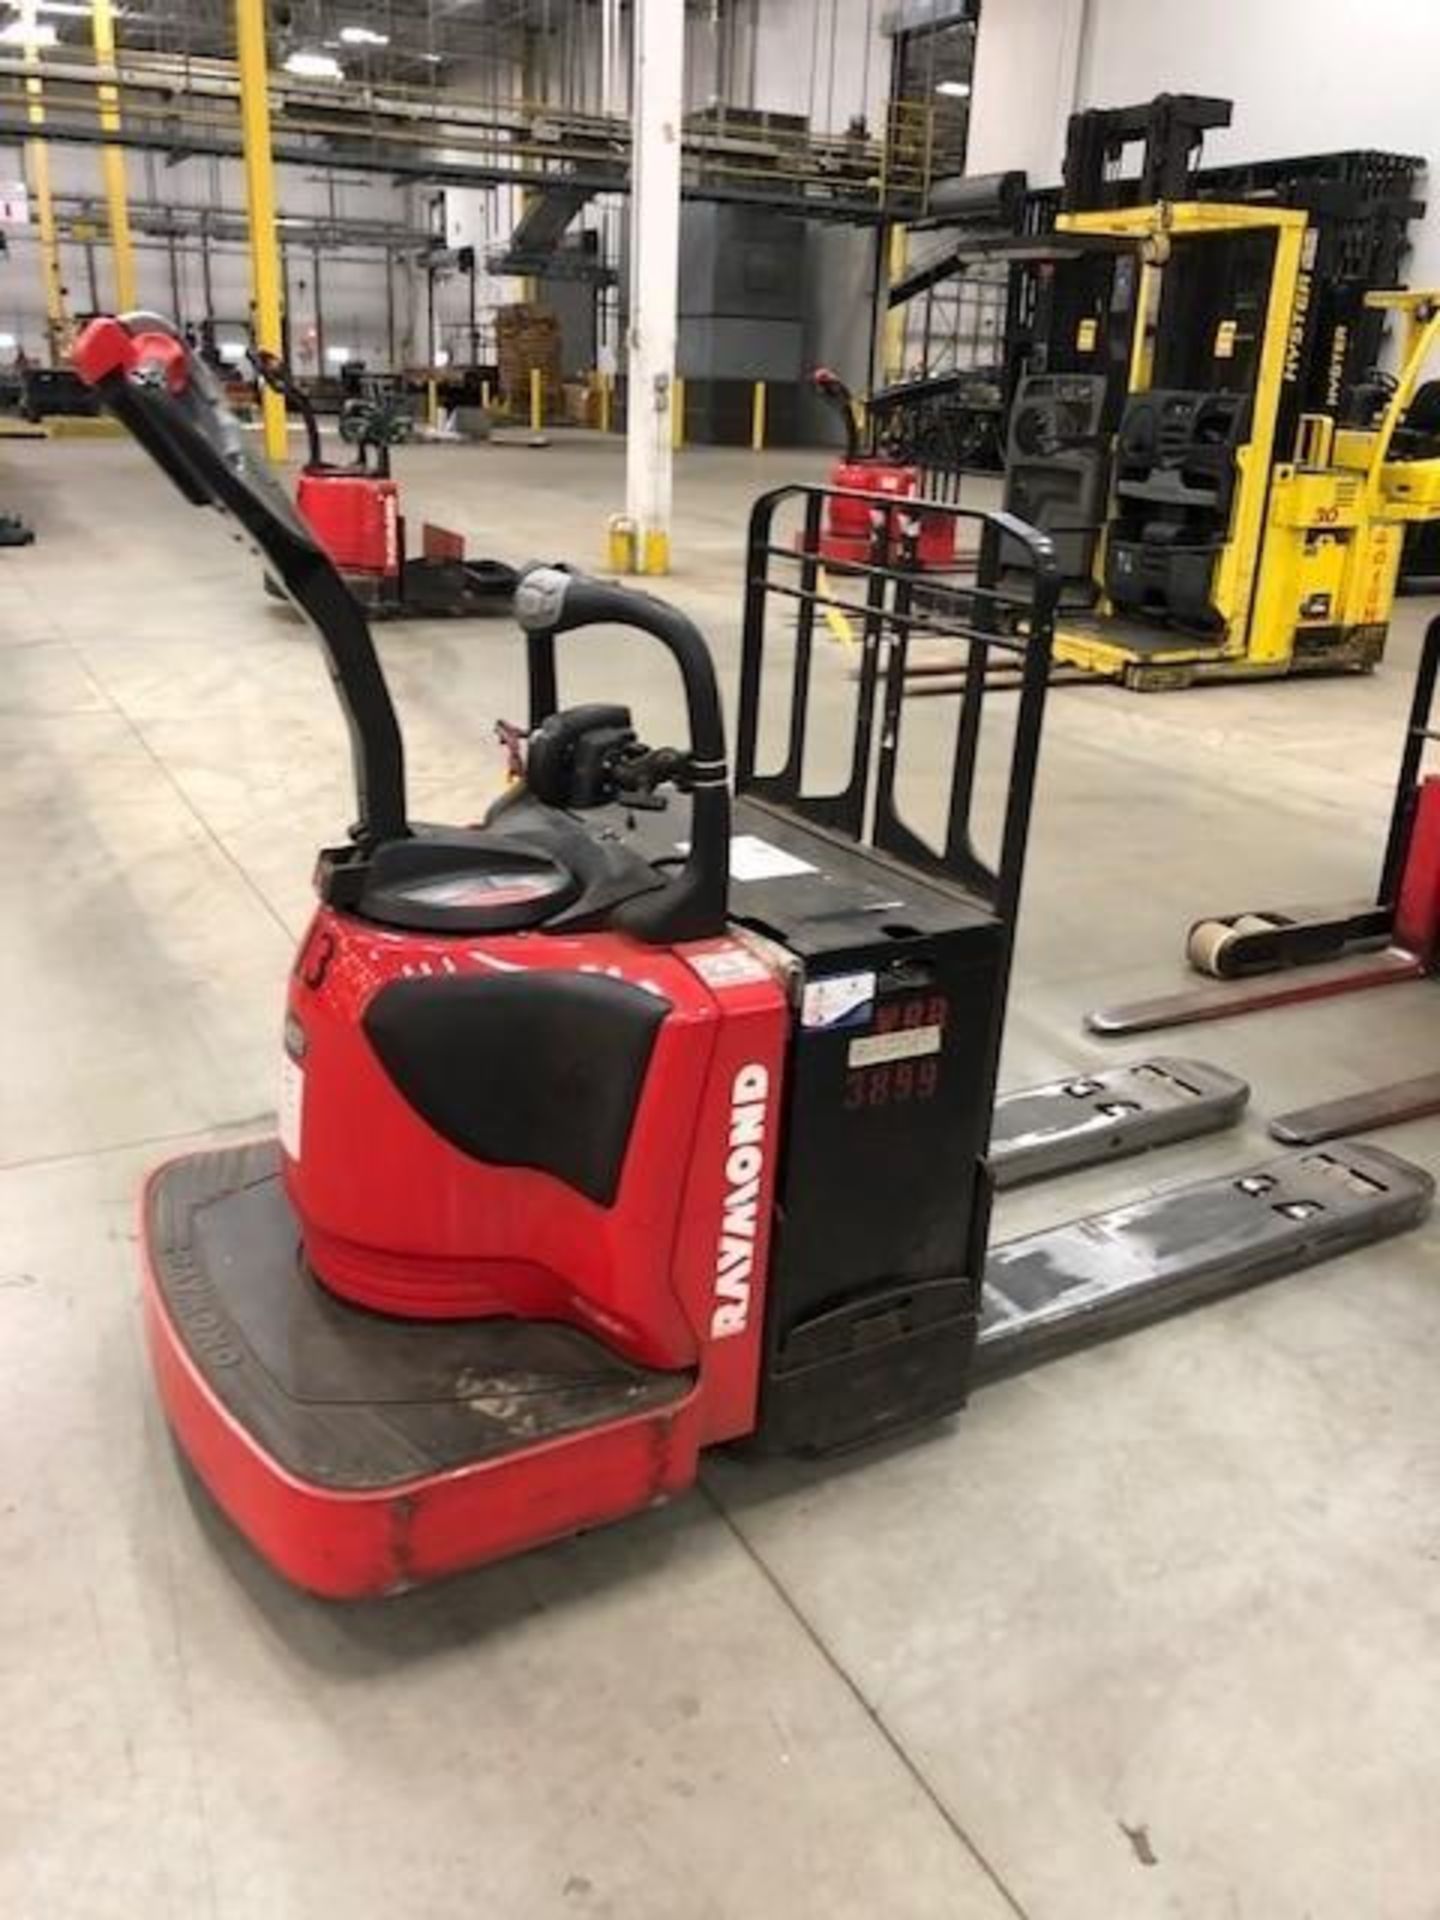 2013 RAYMOND 6,000 LB. CAPACITY ELECTRIC PALLET TRUCK; MODEL 8410, S/N 841-13-17109, WITH IWAREHOUSE - Image 3 of 8